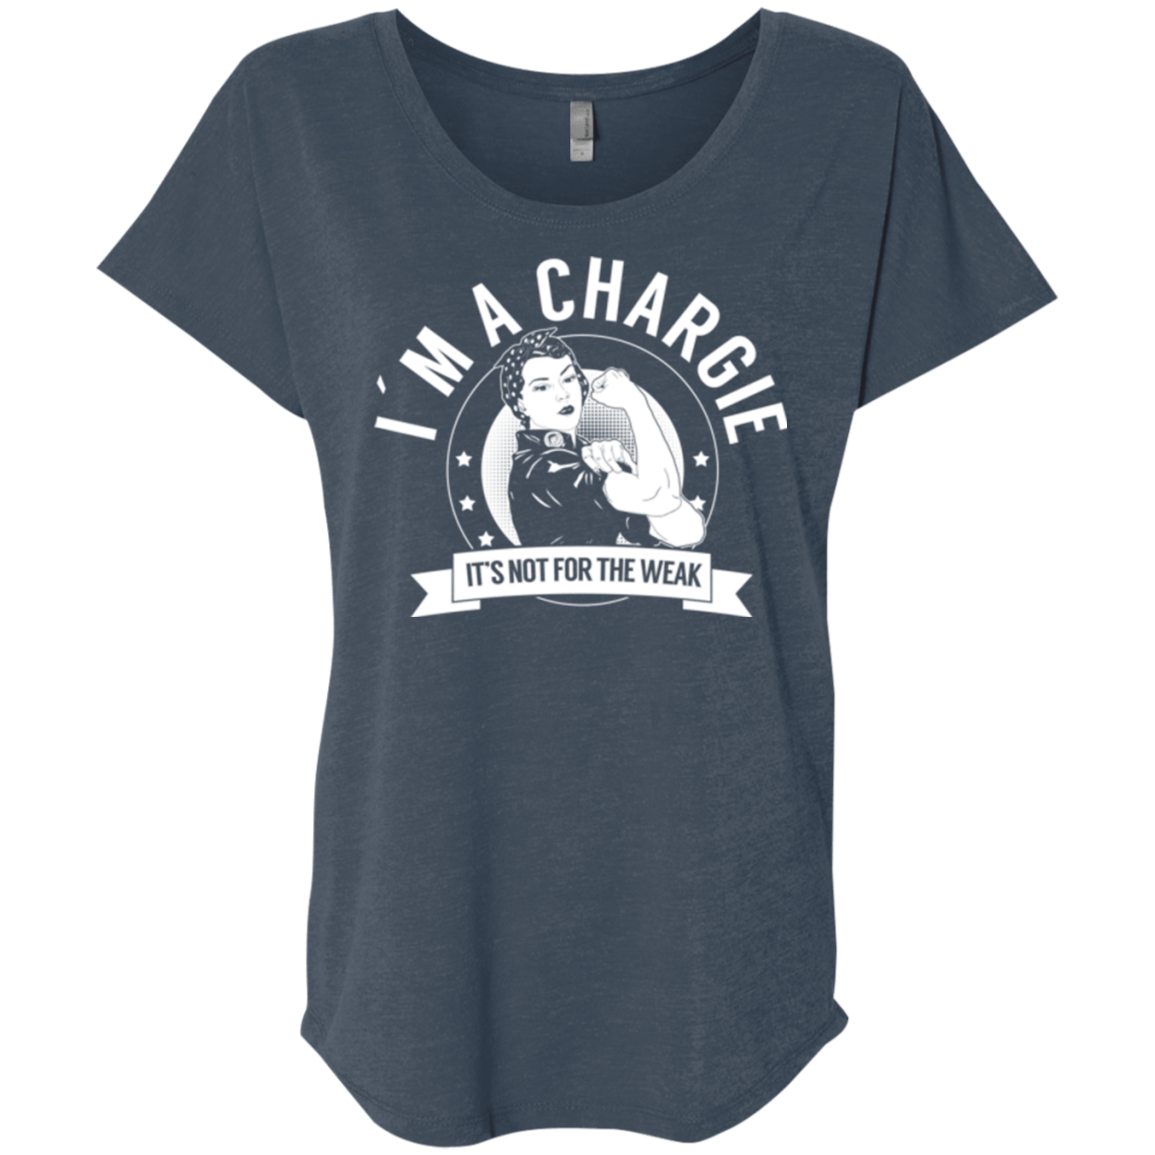 Chargie Not For The Weak Dolman Sleeve - The Unchargeables